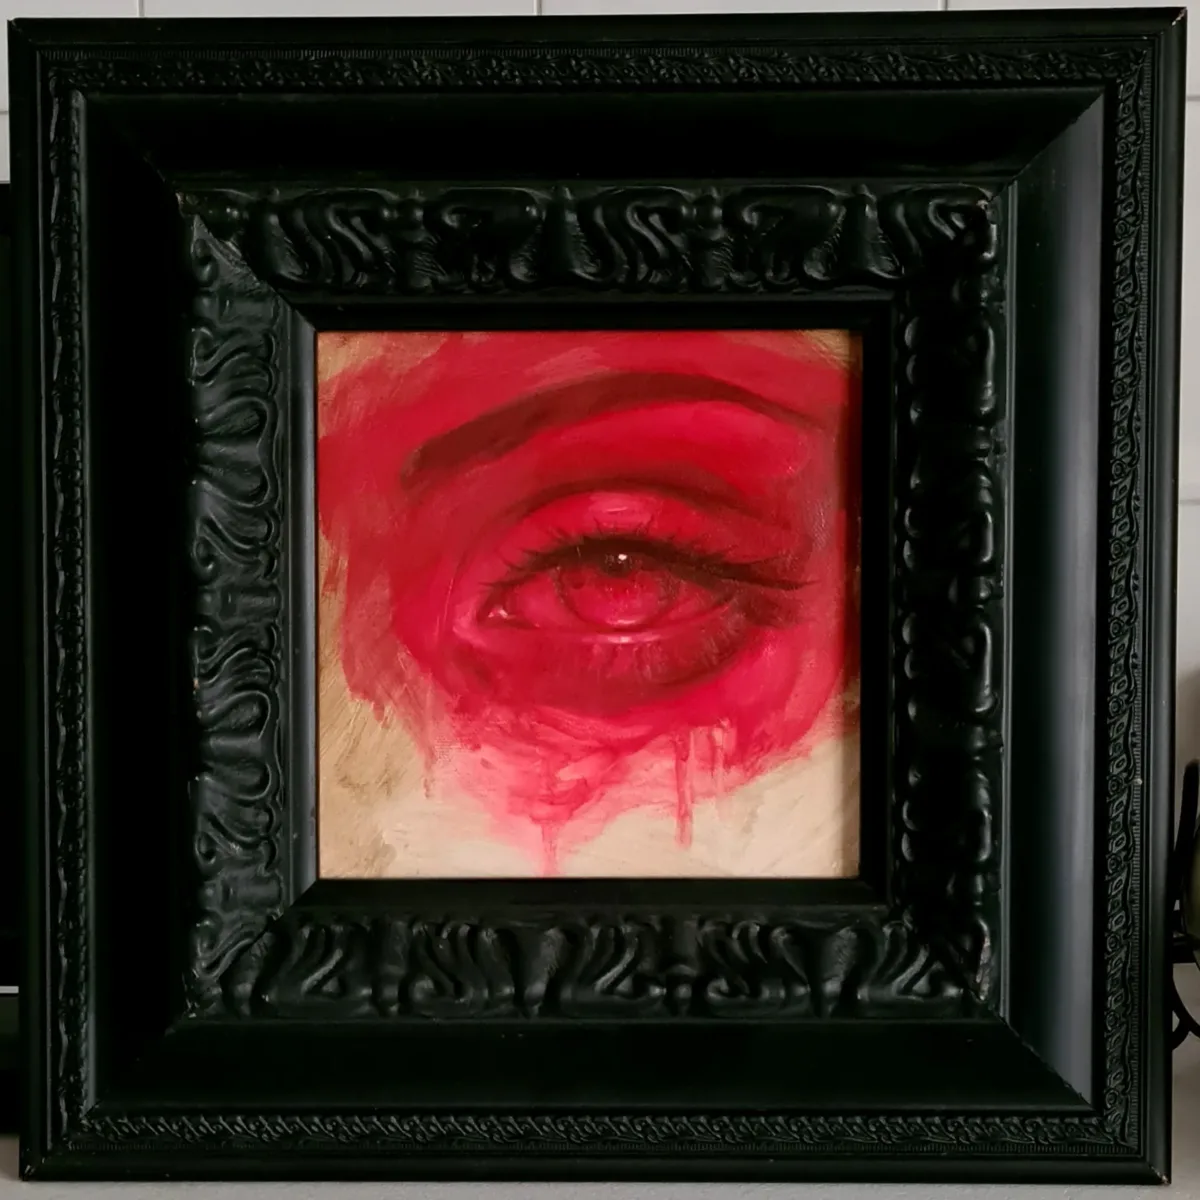 Painting of contemporary artist Vartan Ghazarian - Red. For sale.